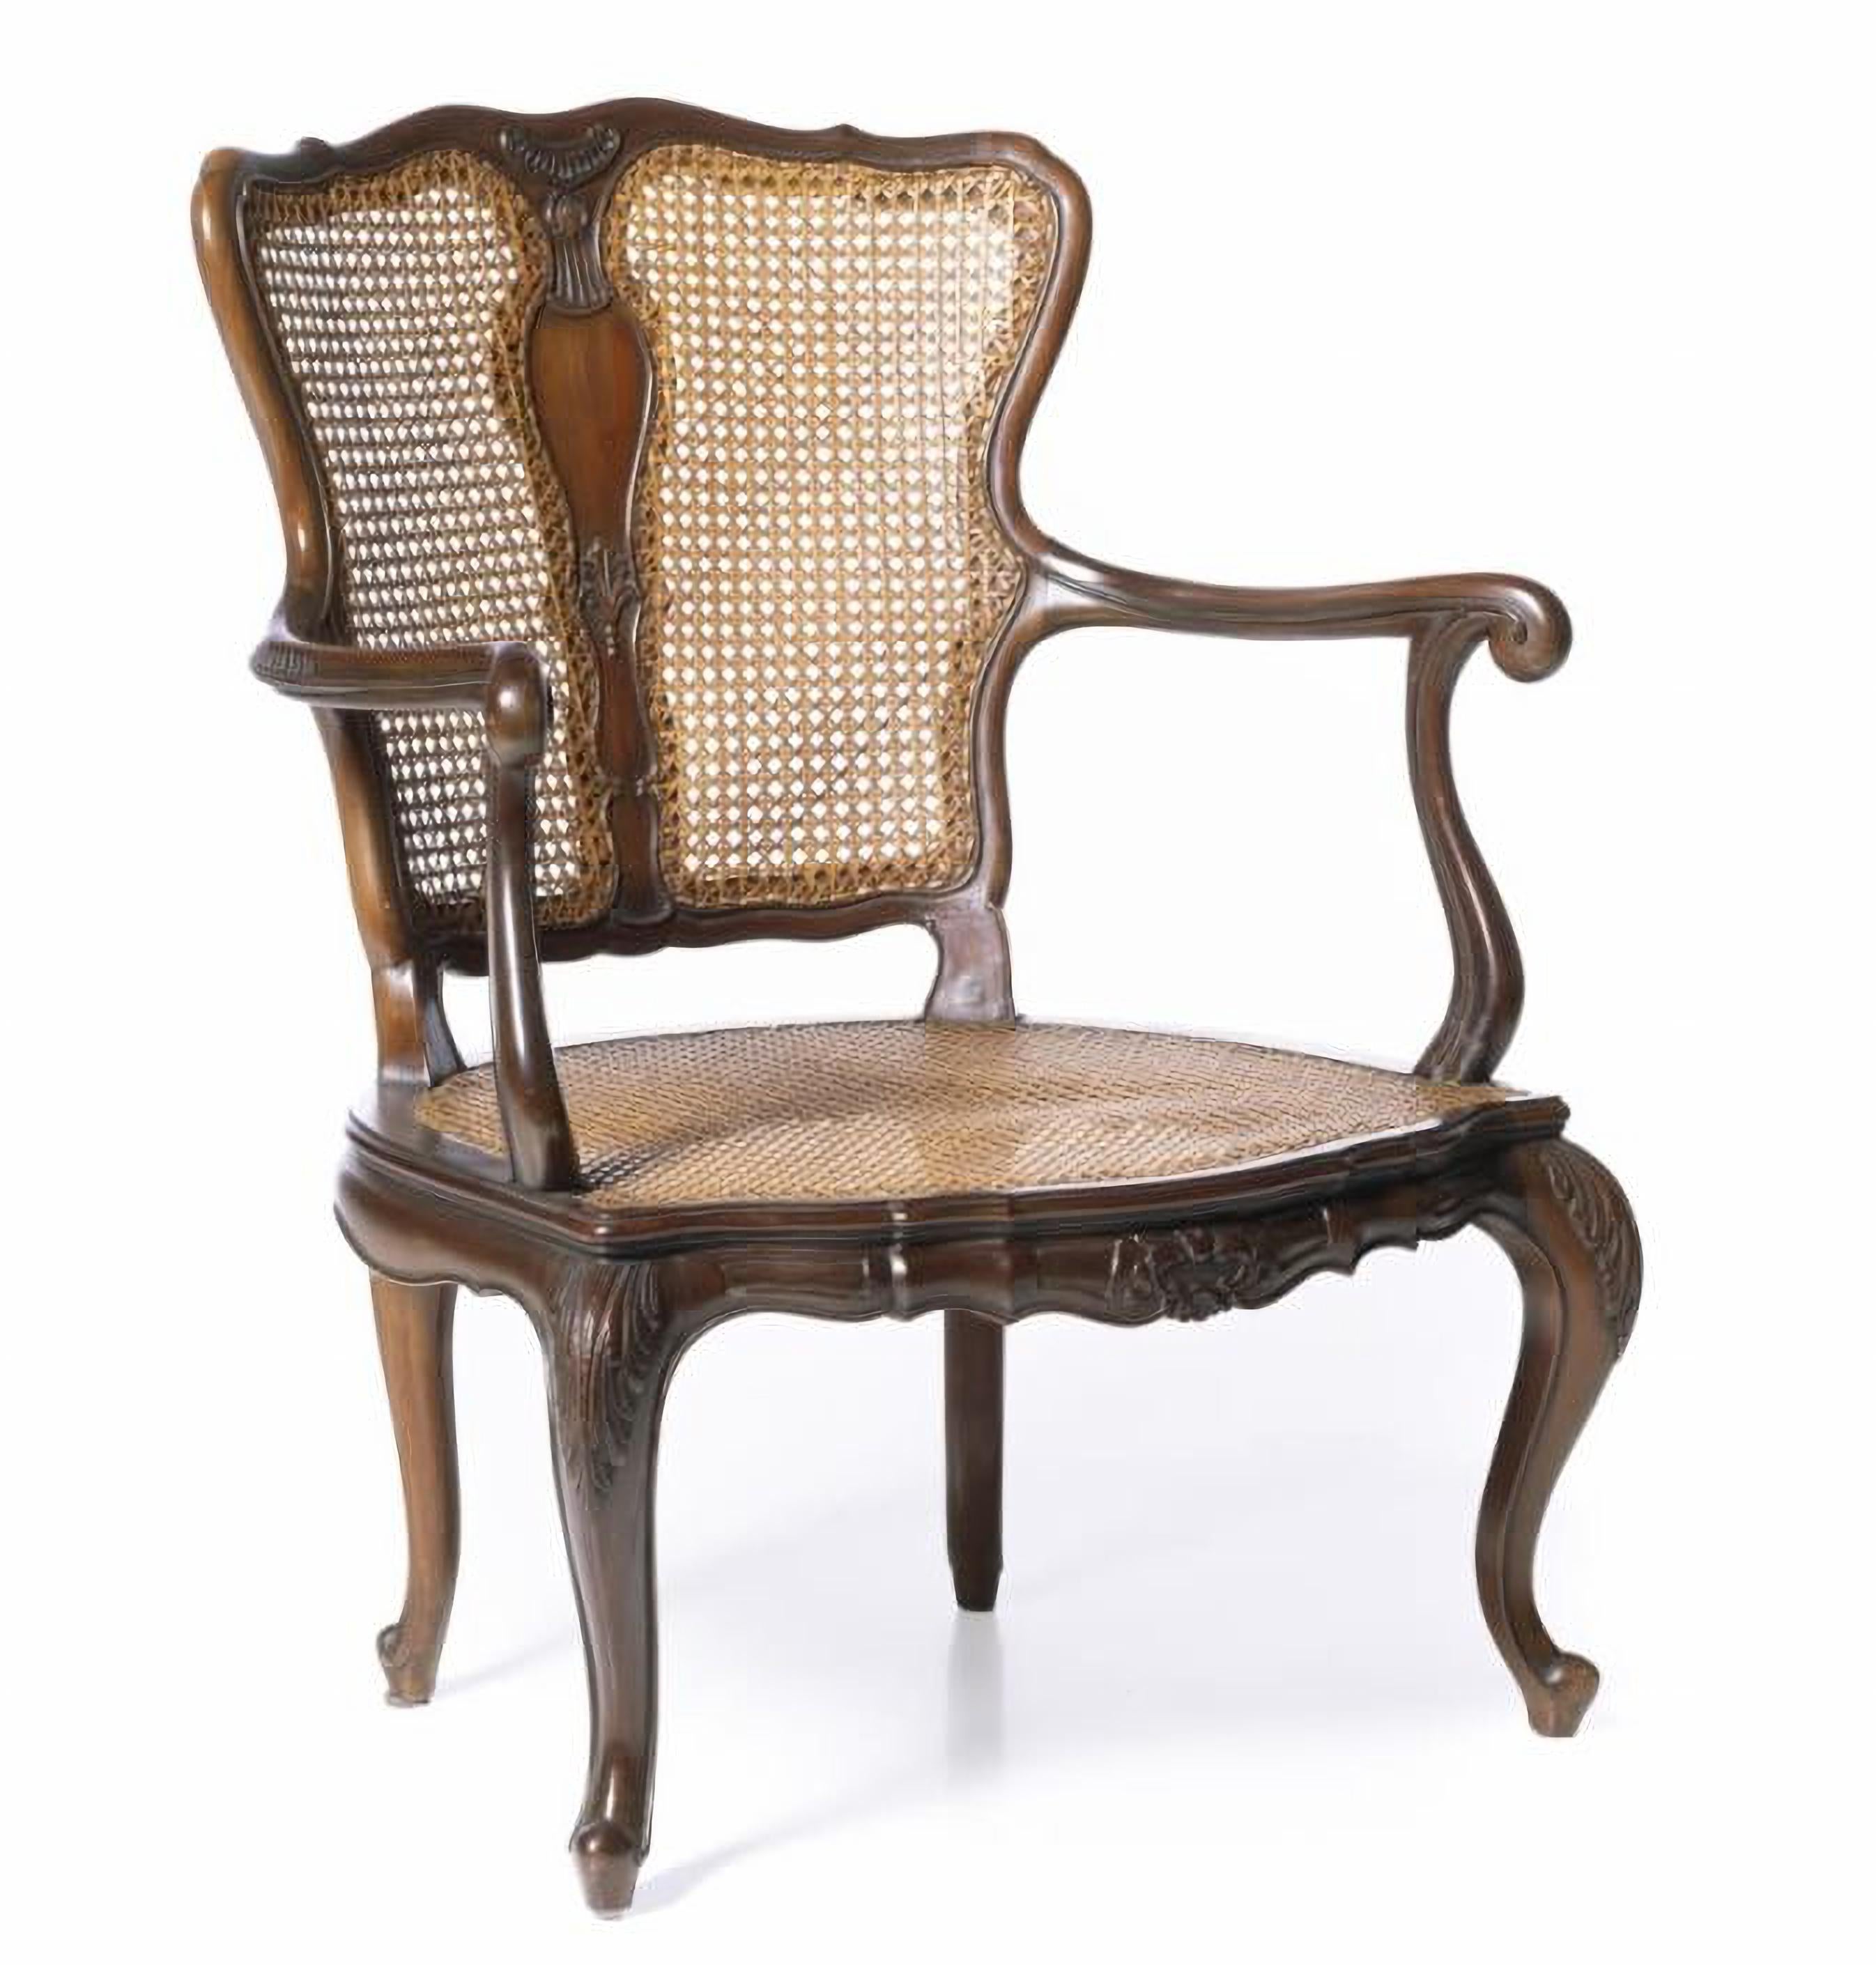 Portuguese BEAUTIFUL PORTUGUESE ARMCHAIR from the 19th century For Sale